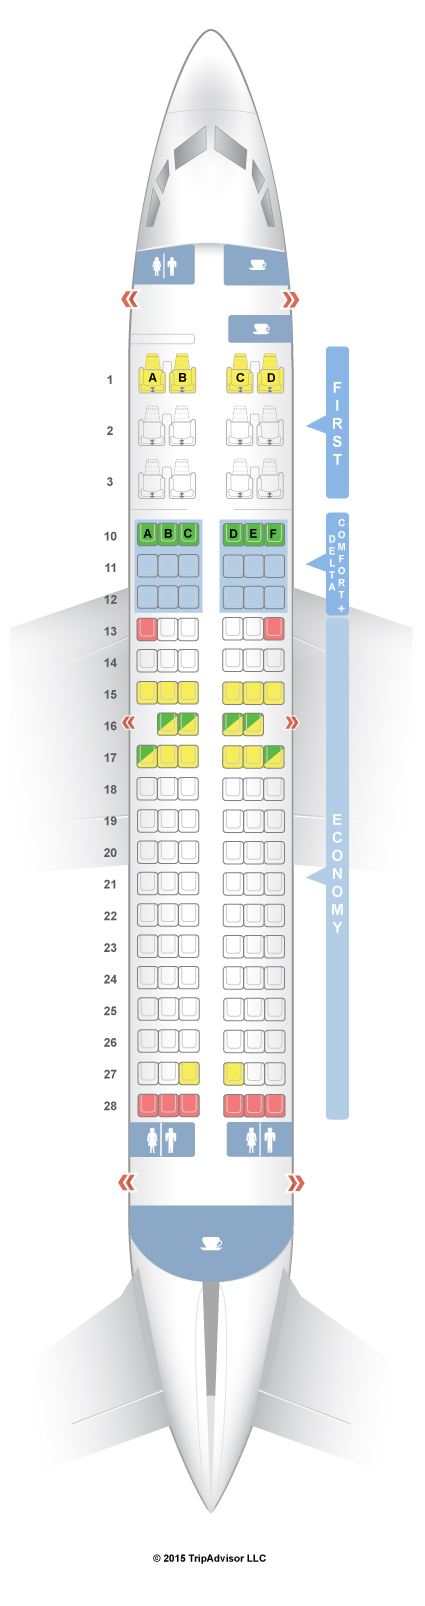 Airplane Seating Chart Southwest